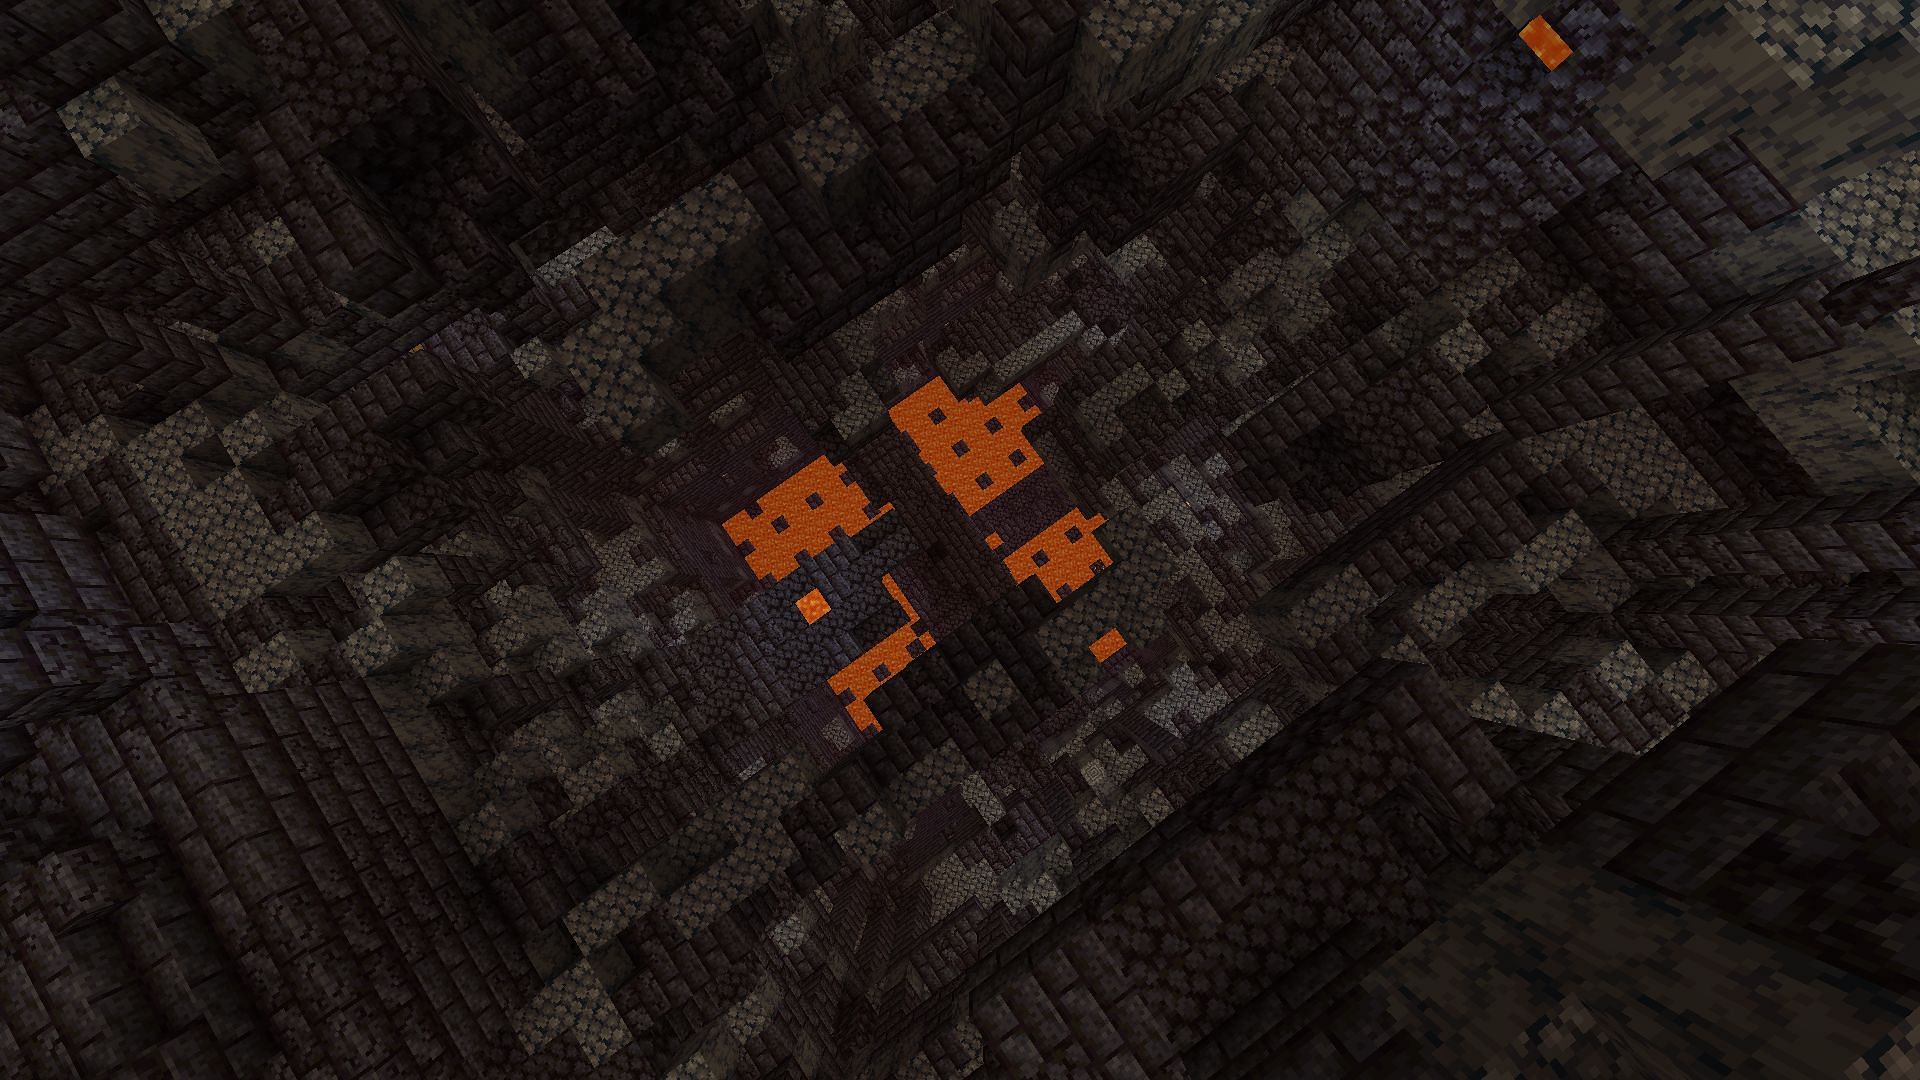 Bastion Remnant treasure room variant has a chance of generating diamonds in Minecraft 1.19 (Image via Mojang)